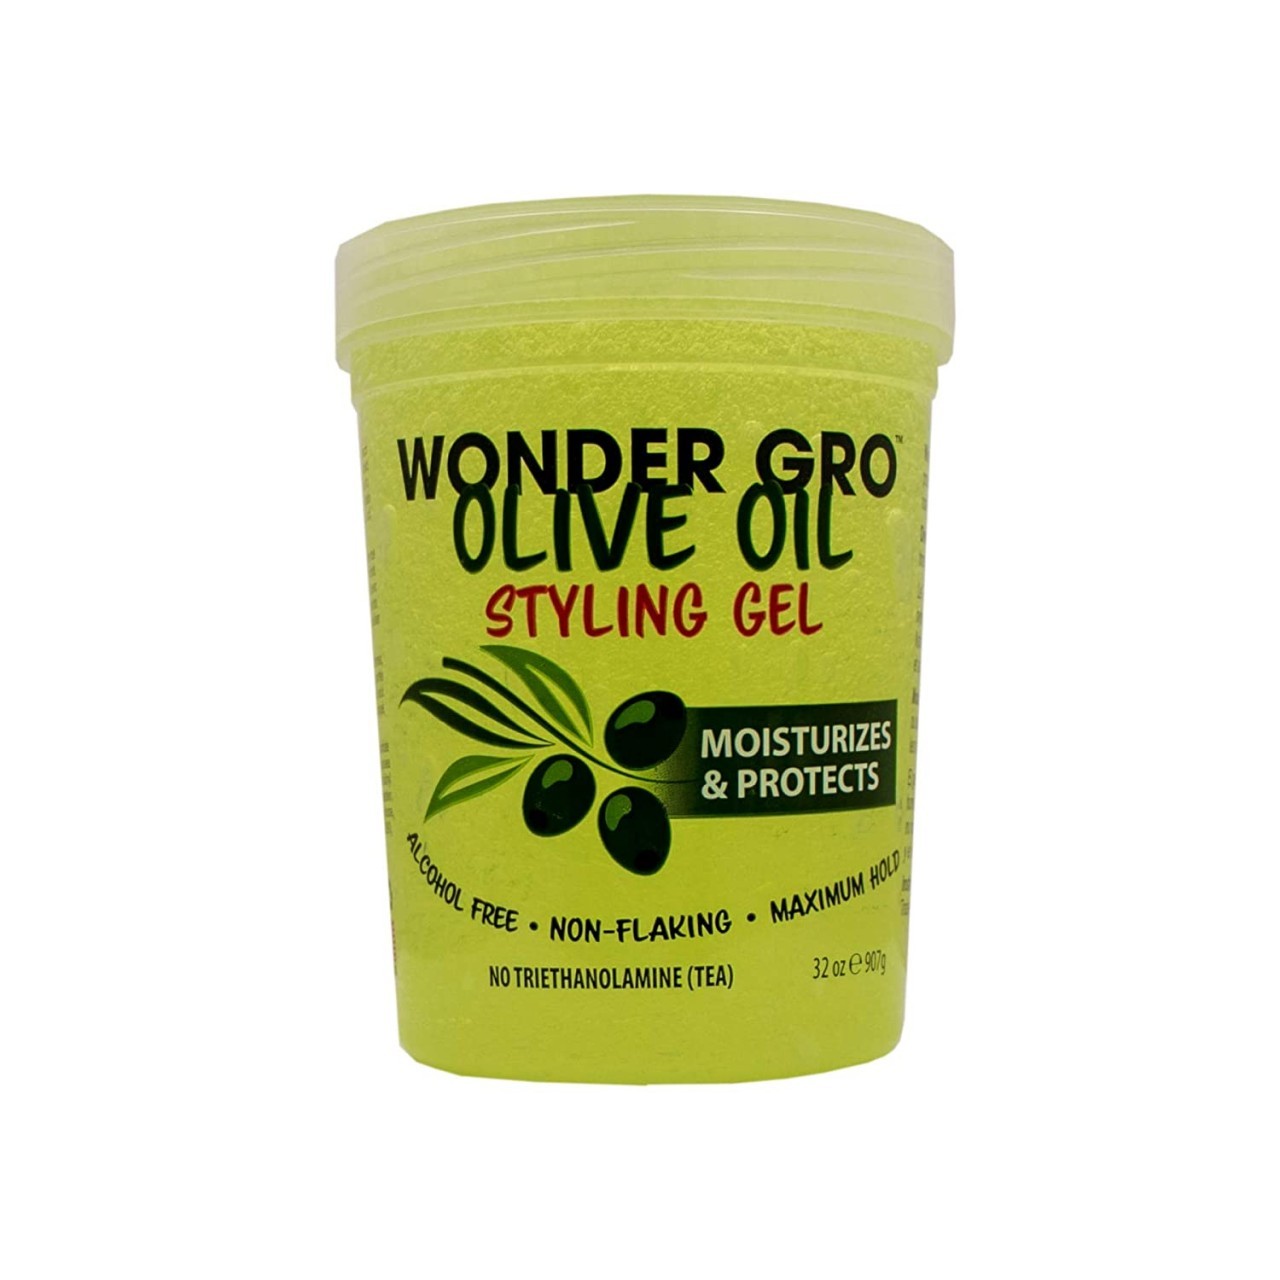 Wonder Gro Olive Oil Hair Styling Gel, 32 fl oz - Non-Flaking & Alcohol-Free - Moisturizes, Protects